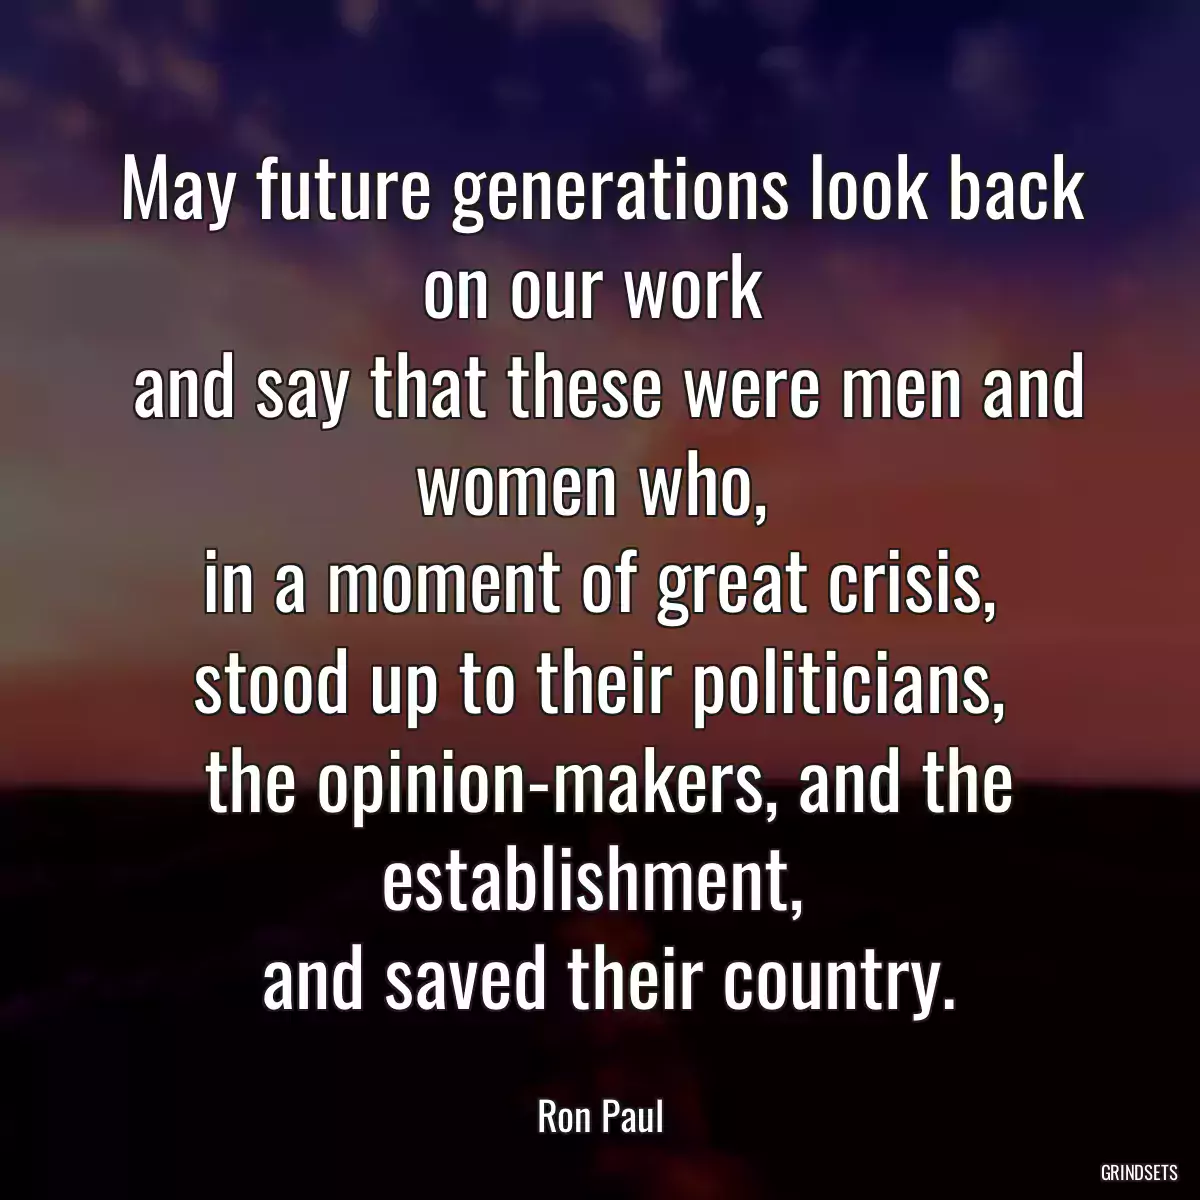 May future generations look back on our work 
 and say that these were men and women who, 
 in a moment of great crisis, 
 stood up to their politicians, 
 the opinion-makers, and the establishment, 
 and saved their country.